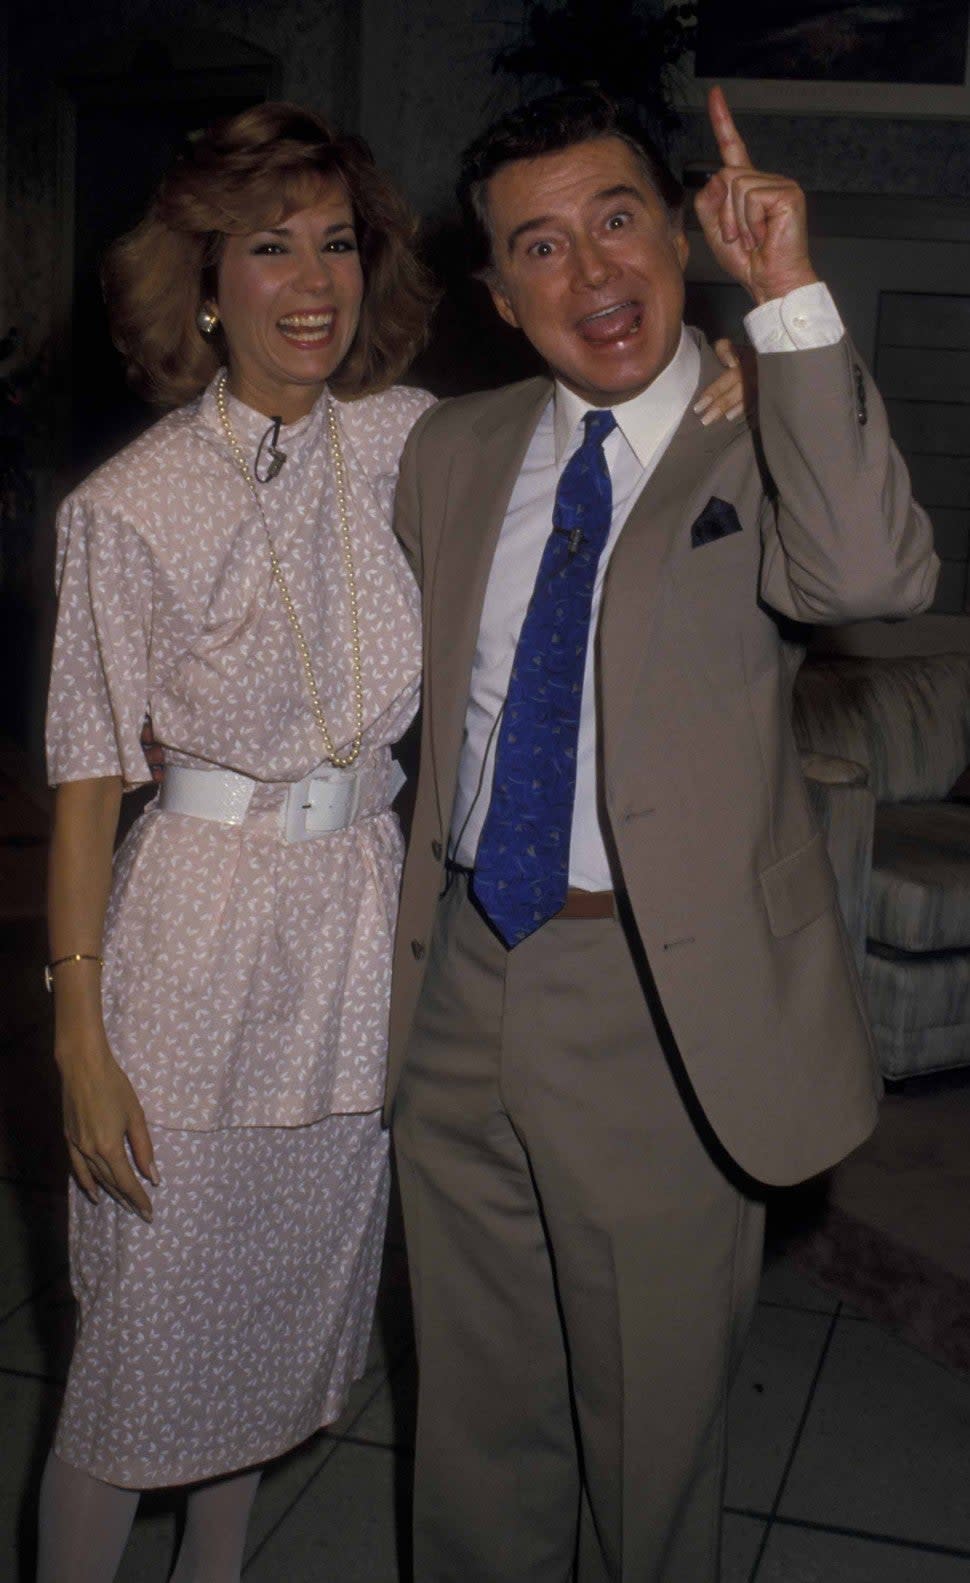 Kathy Lee Gifford and Regis Philbin attend the taping of 